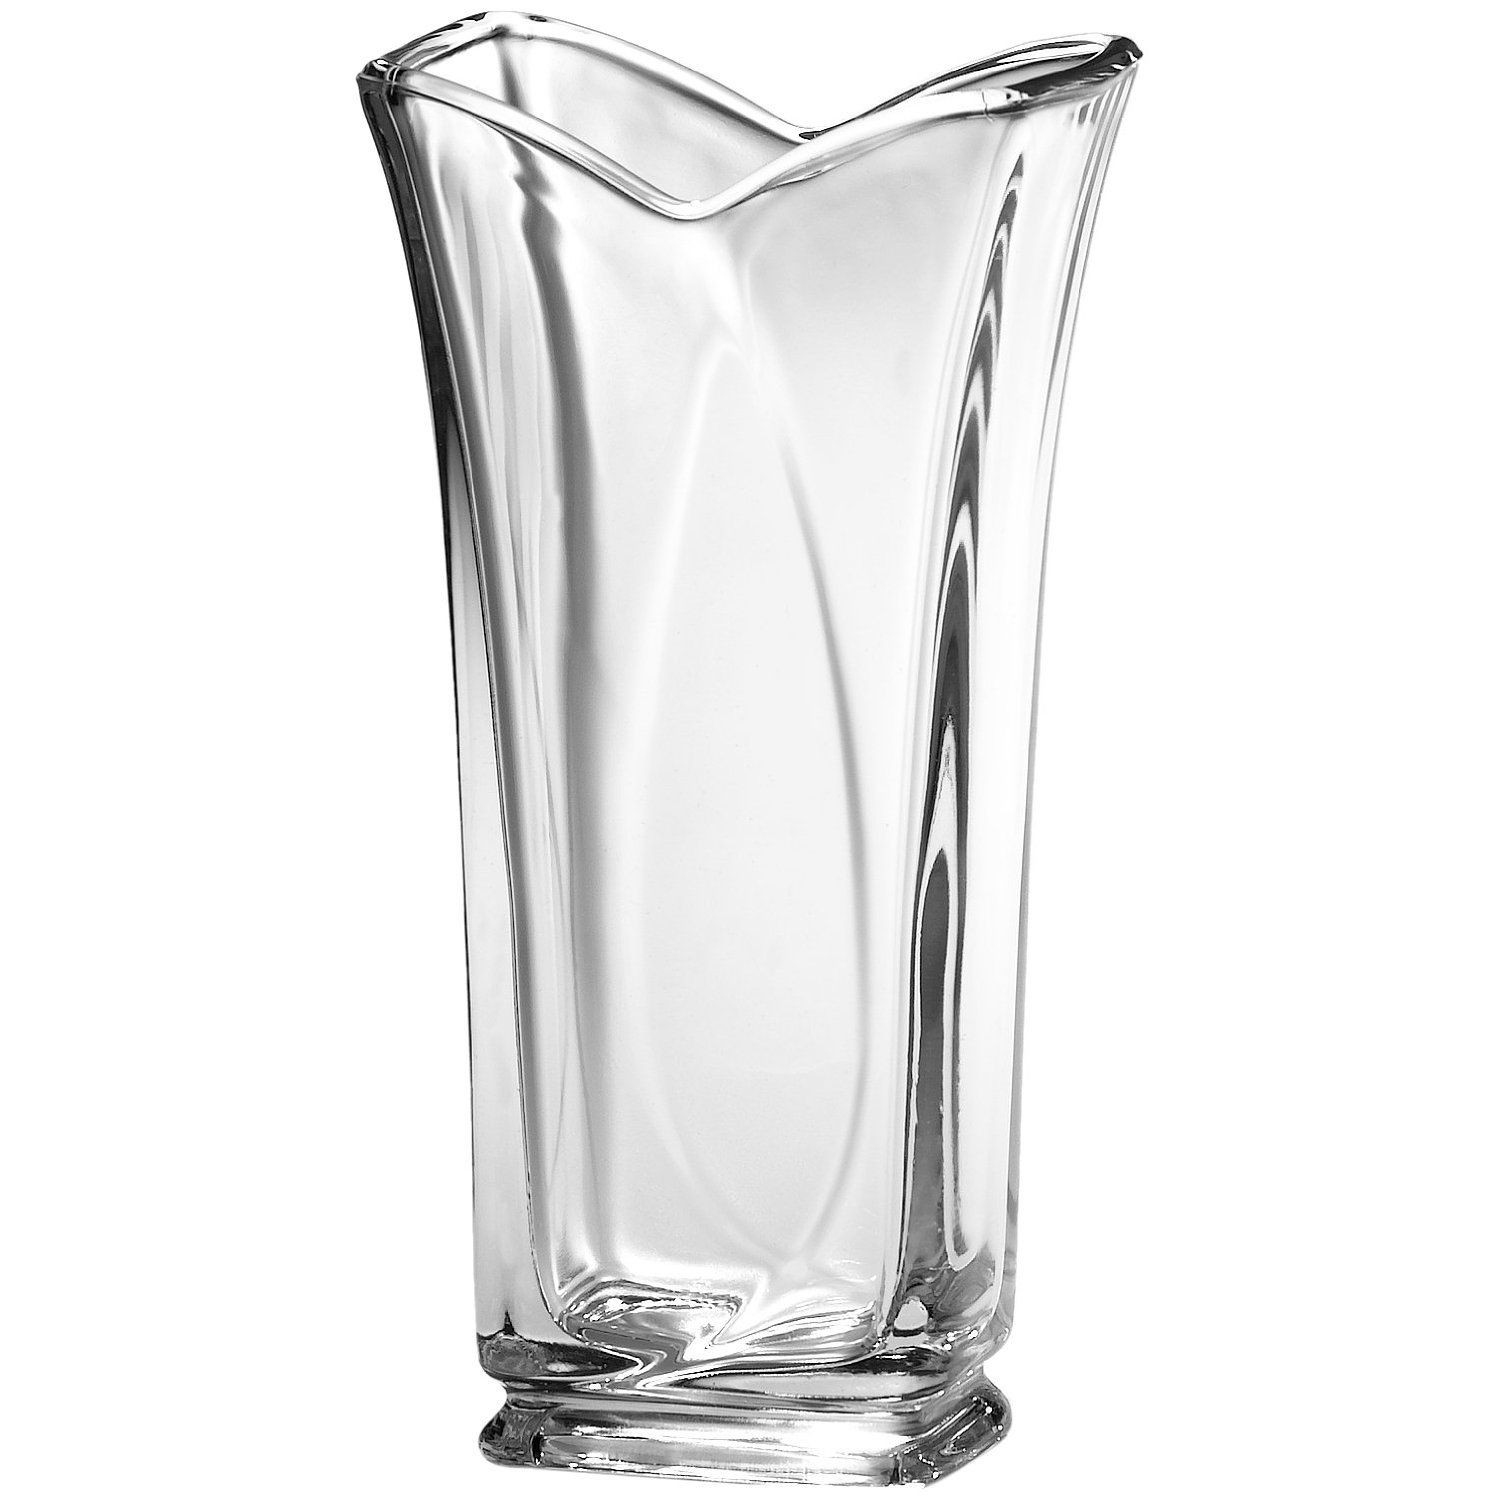 15 Cute Flared Glass Vase 2024 free download flared glass vase of flower vase glass vase pinterest flowers vase glasses and vase with flower vase glass